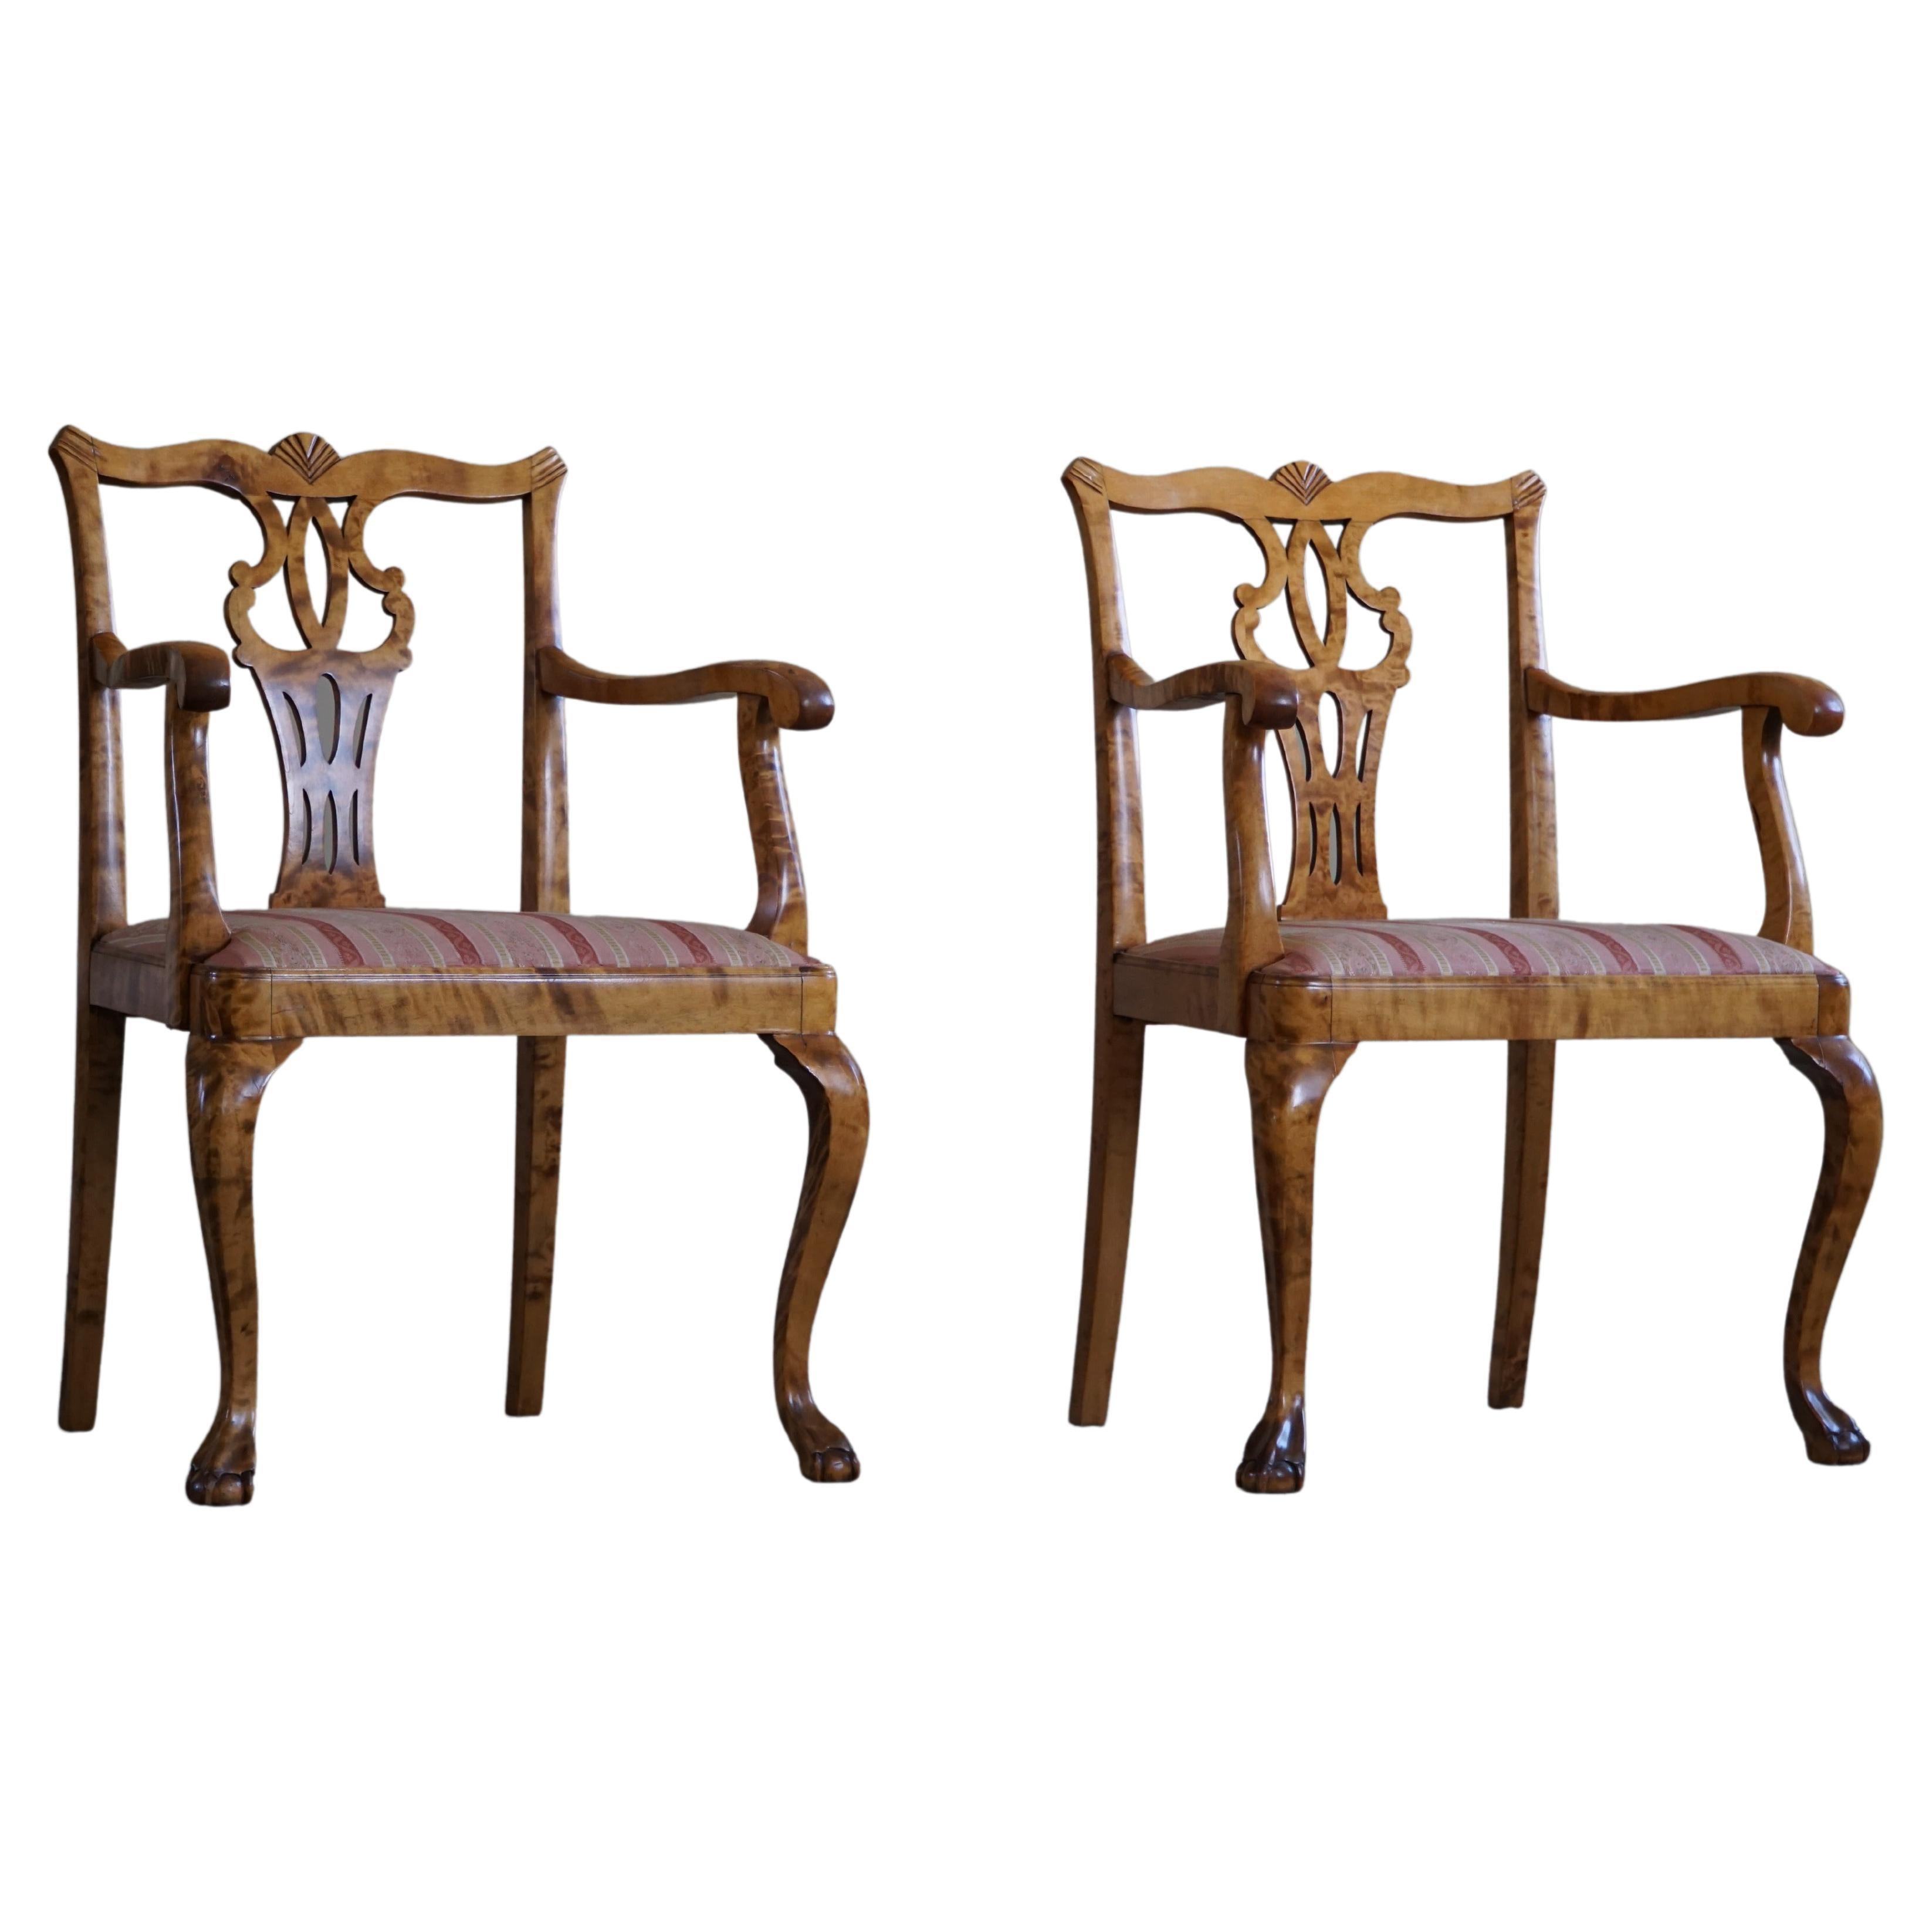 A Pair of English Chippendale Style Armchairs in Birch, 20th Century, England For Sale